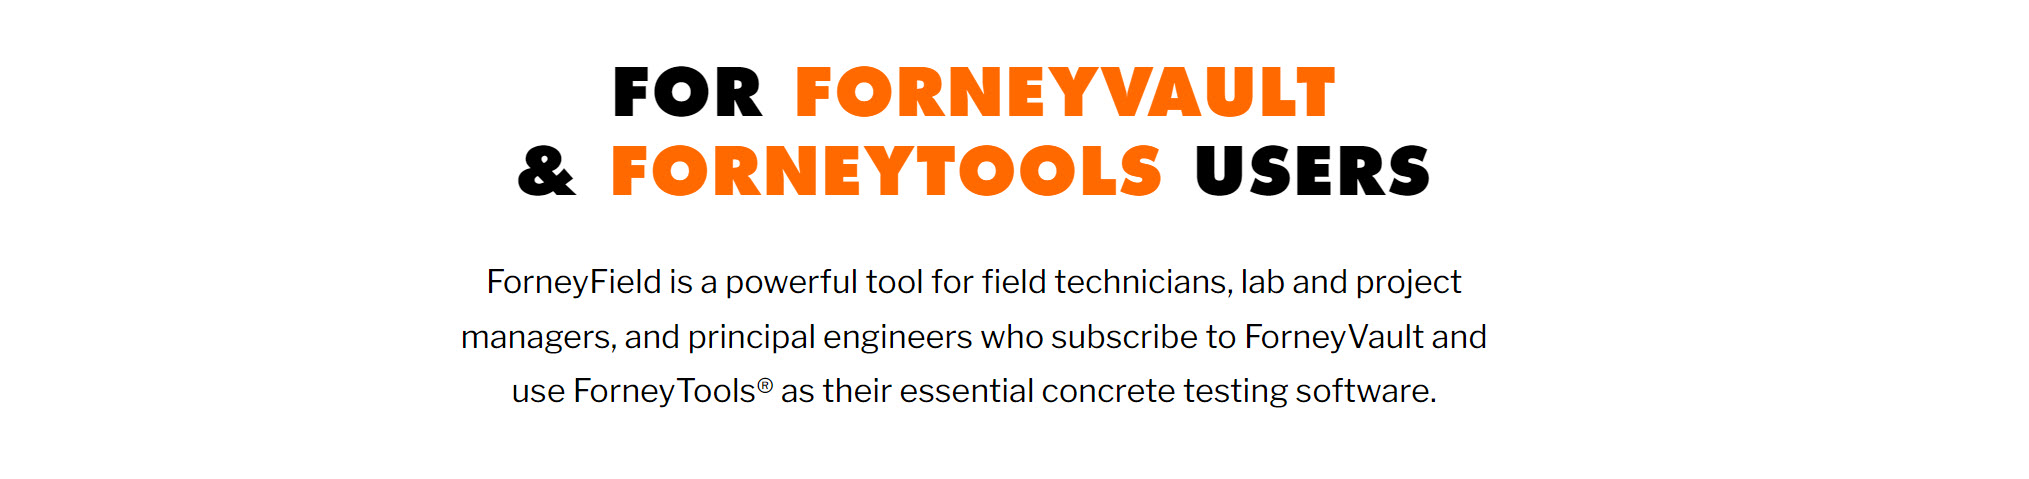 ForneyField for ForneyTools Users Shelf Graphic